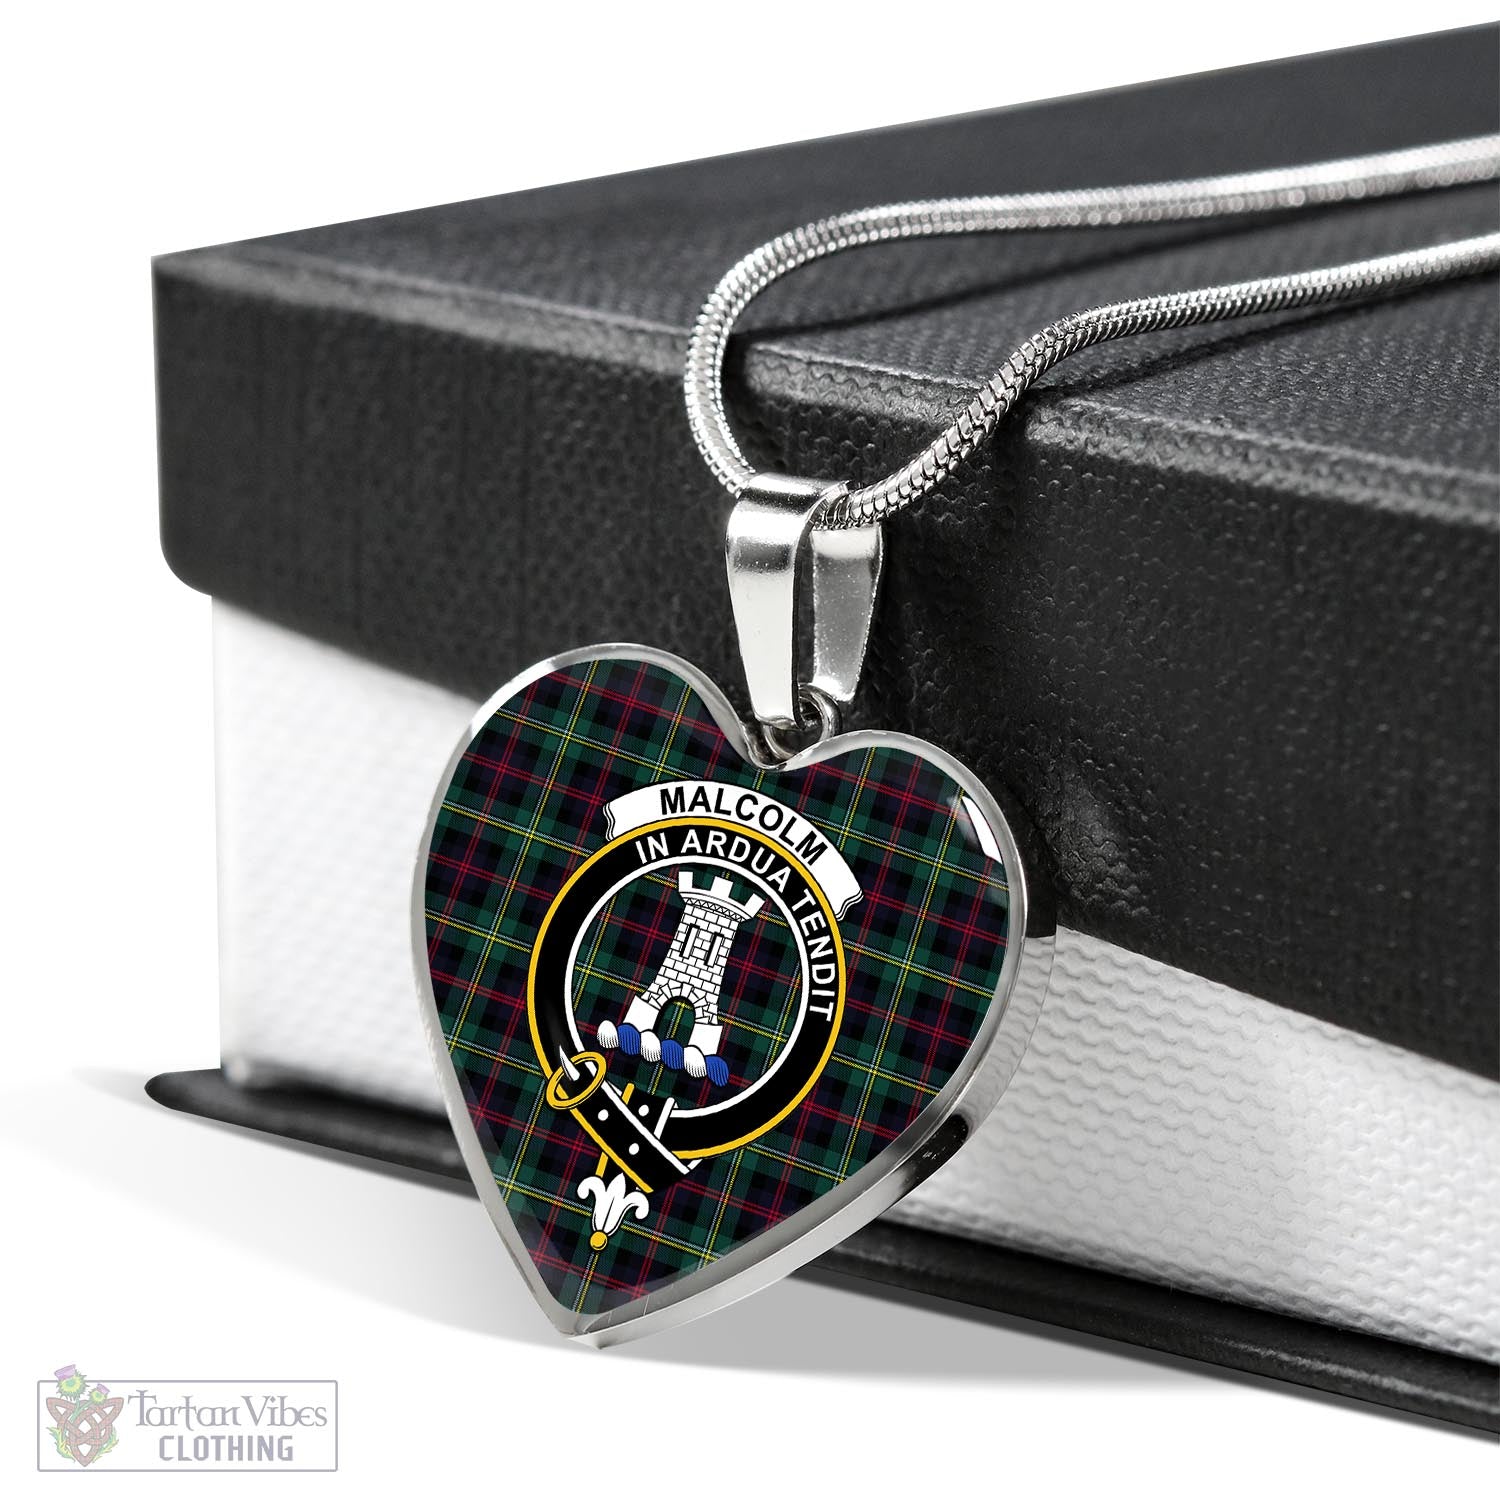 Tartan Vibes Clothing Malcolm Modern Tartan Heart Necklace with Family Crest